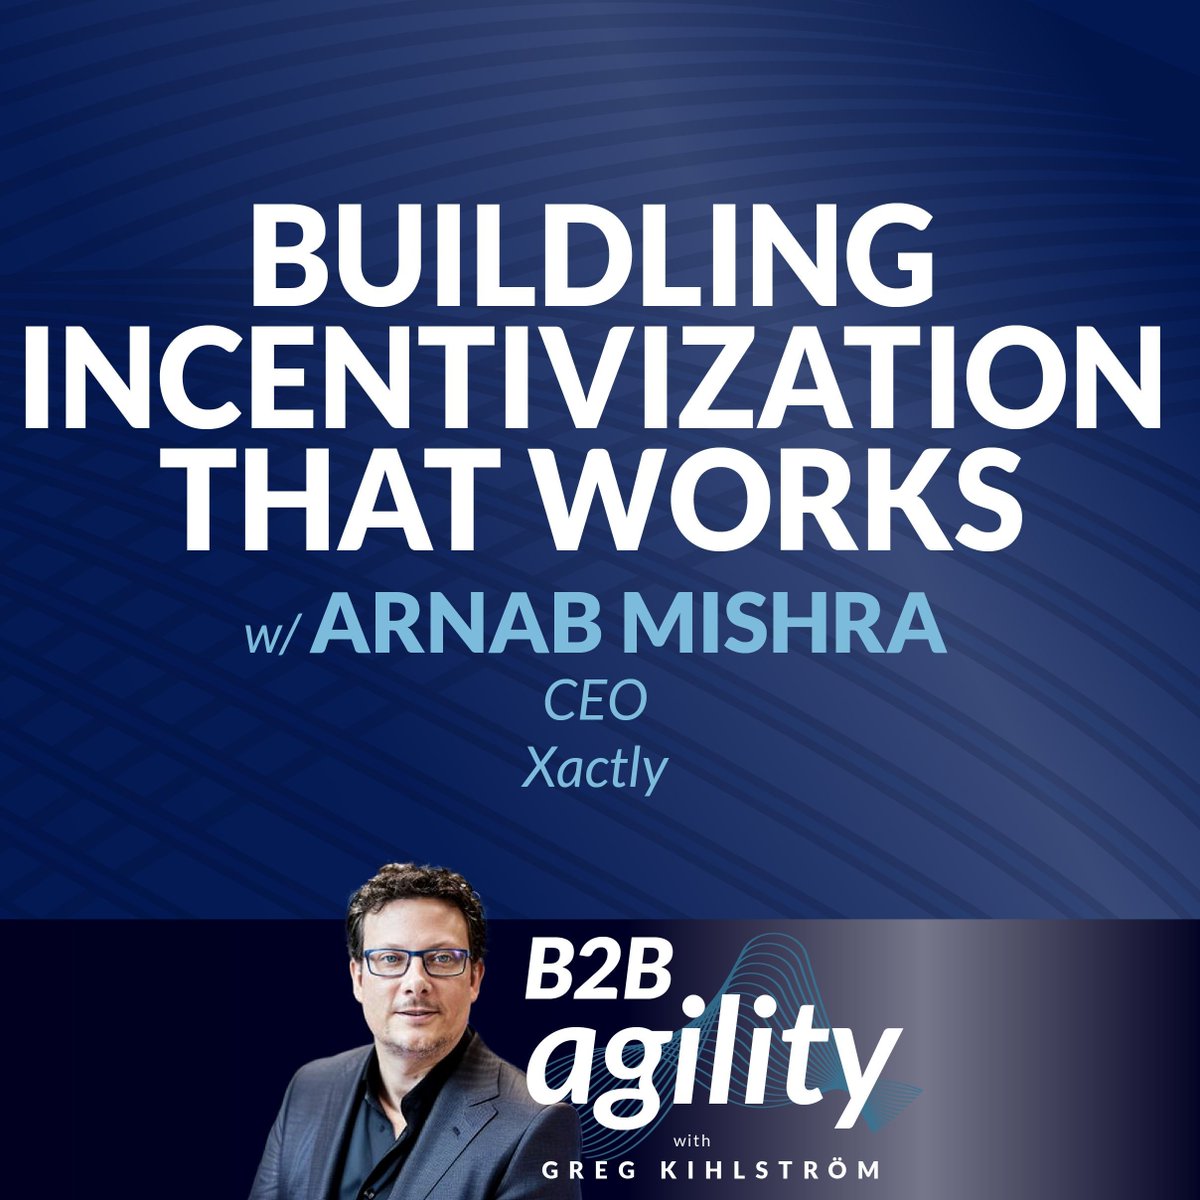 🔊  B2B Marketers: buff.ly/3vK0ZNM  @gregkihlstrom talks with Arnab Mishra from @Xactly about building incentivization that works on the latest episode of the #B2BAgility #podcast.

#b2bmarketing #b2bmarketers #B2B #b2bsales #ecommerce #personalization #marketingtips #CX